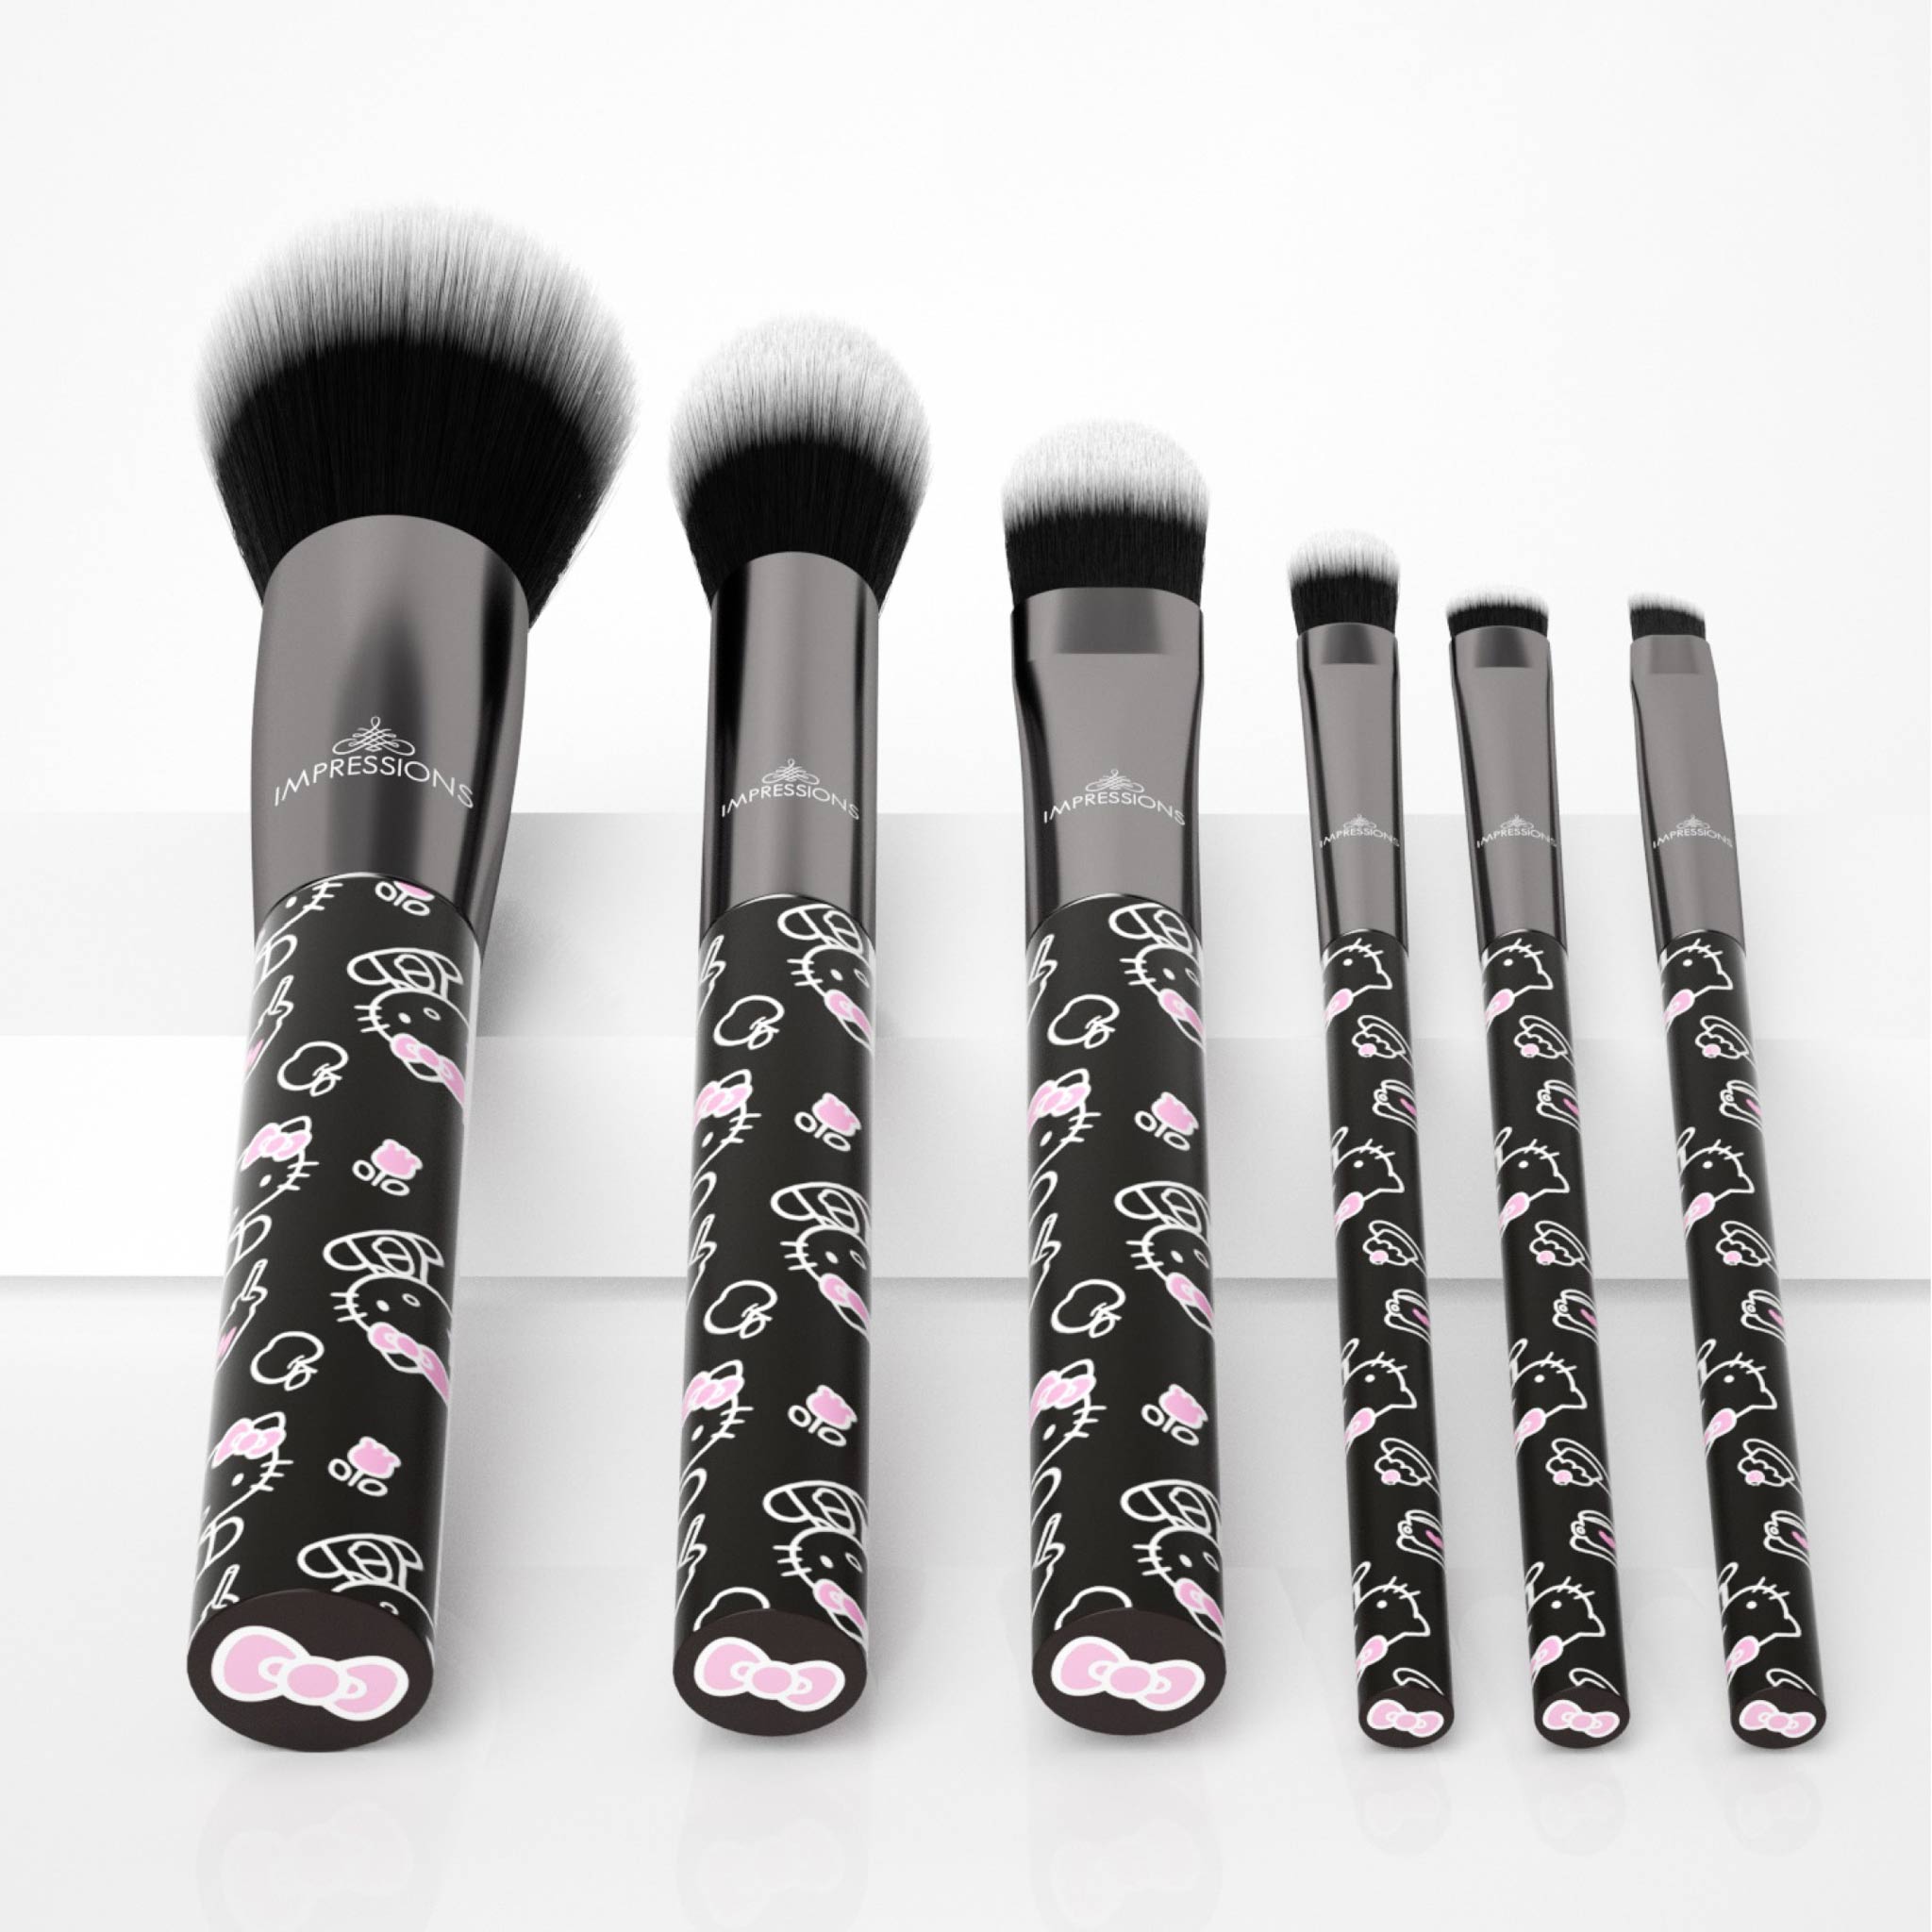 BT21 & Hello Kitty Dreamy Essentials Makeup Brush Collection (Set of 8)